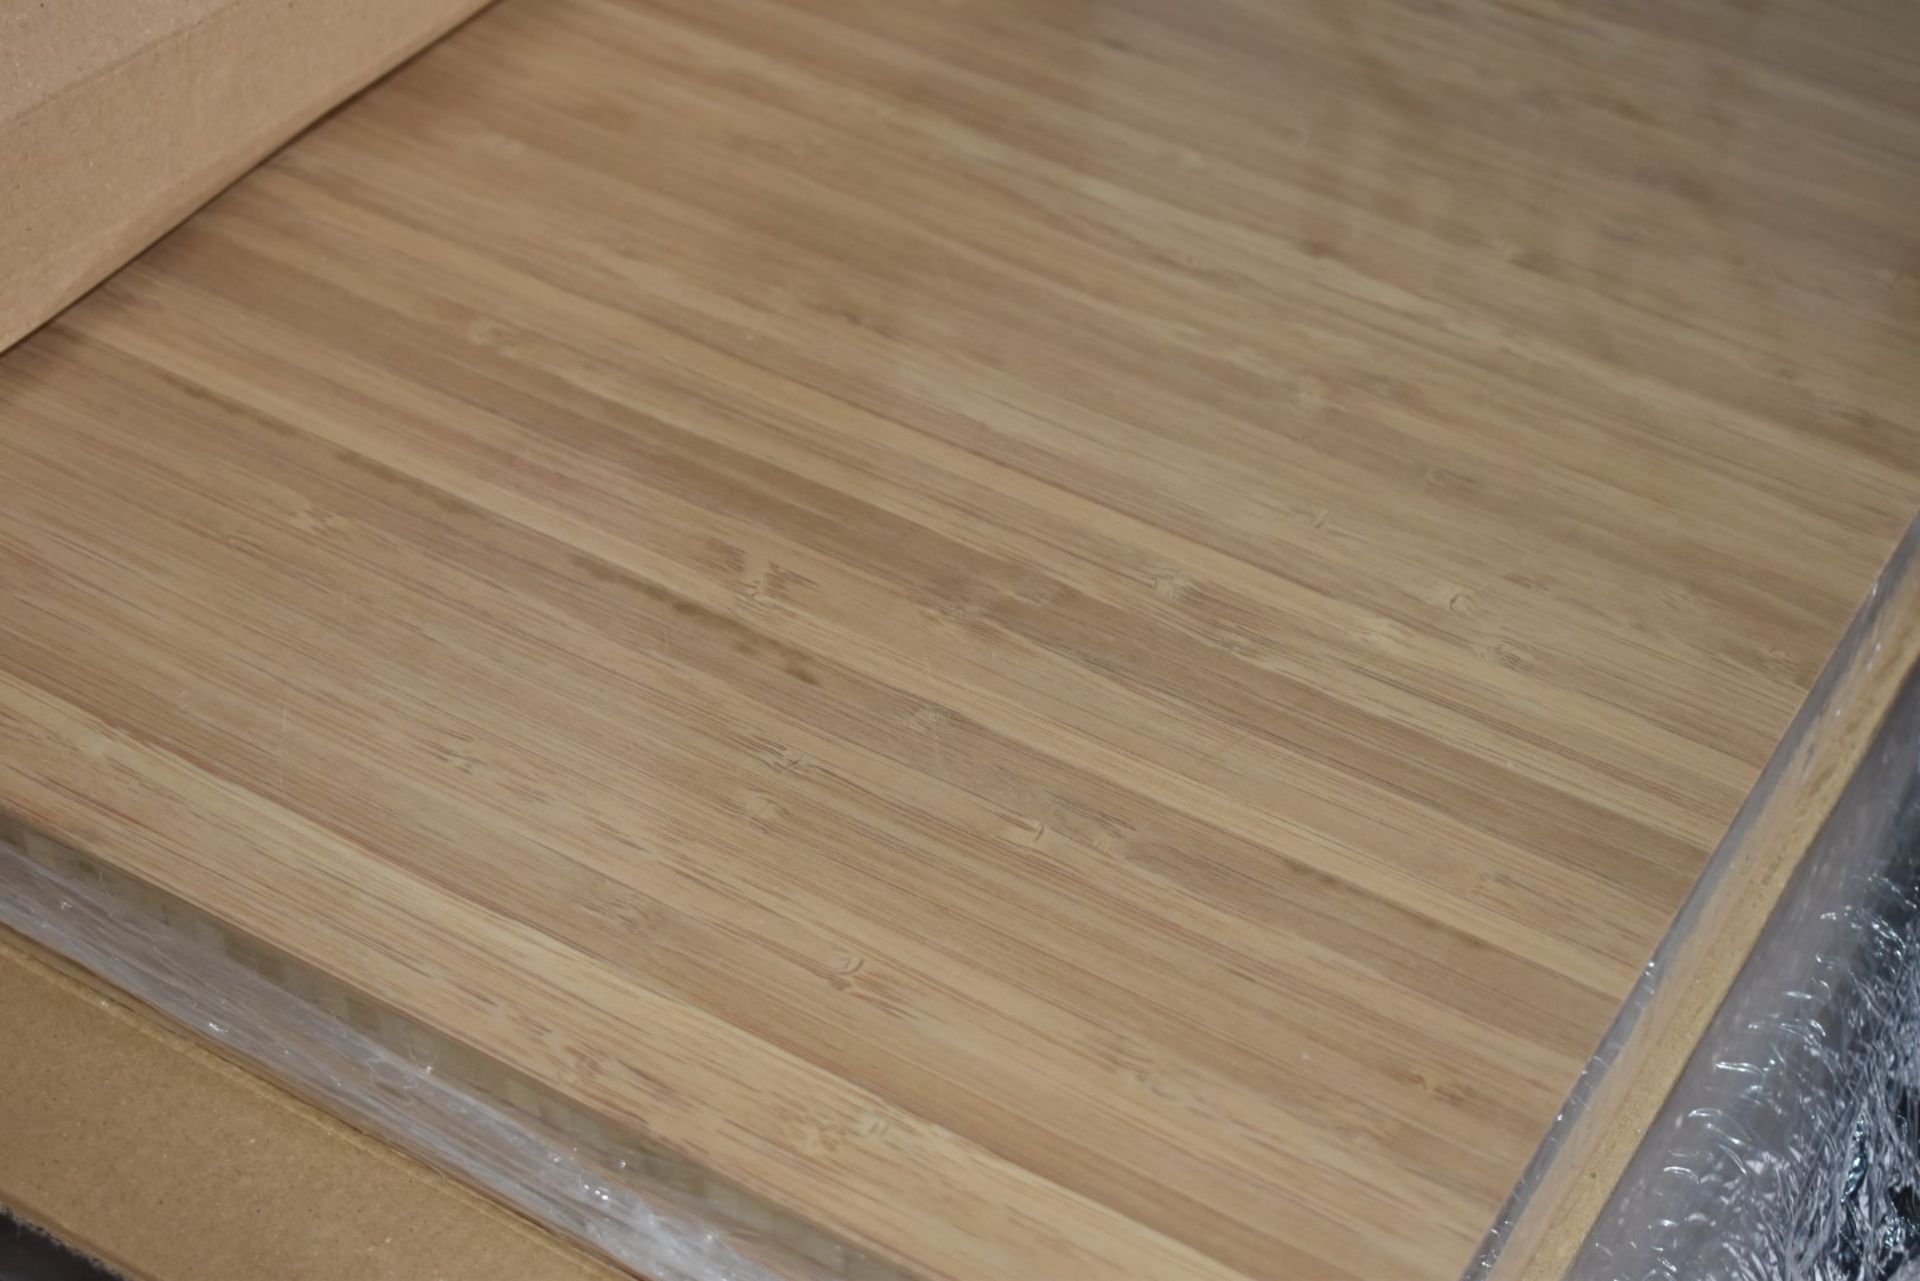 1 x Layered Solid Bamboo Wood Kitchen Worktop - Size: 3000 x 650 x 40mm - Ideal For Kitchens, - Image 6 of 6